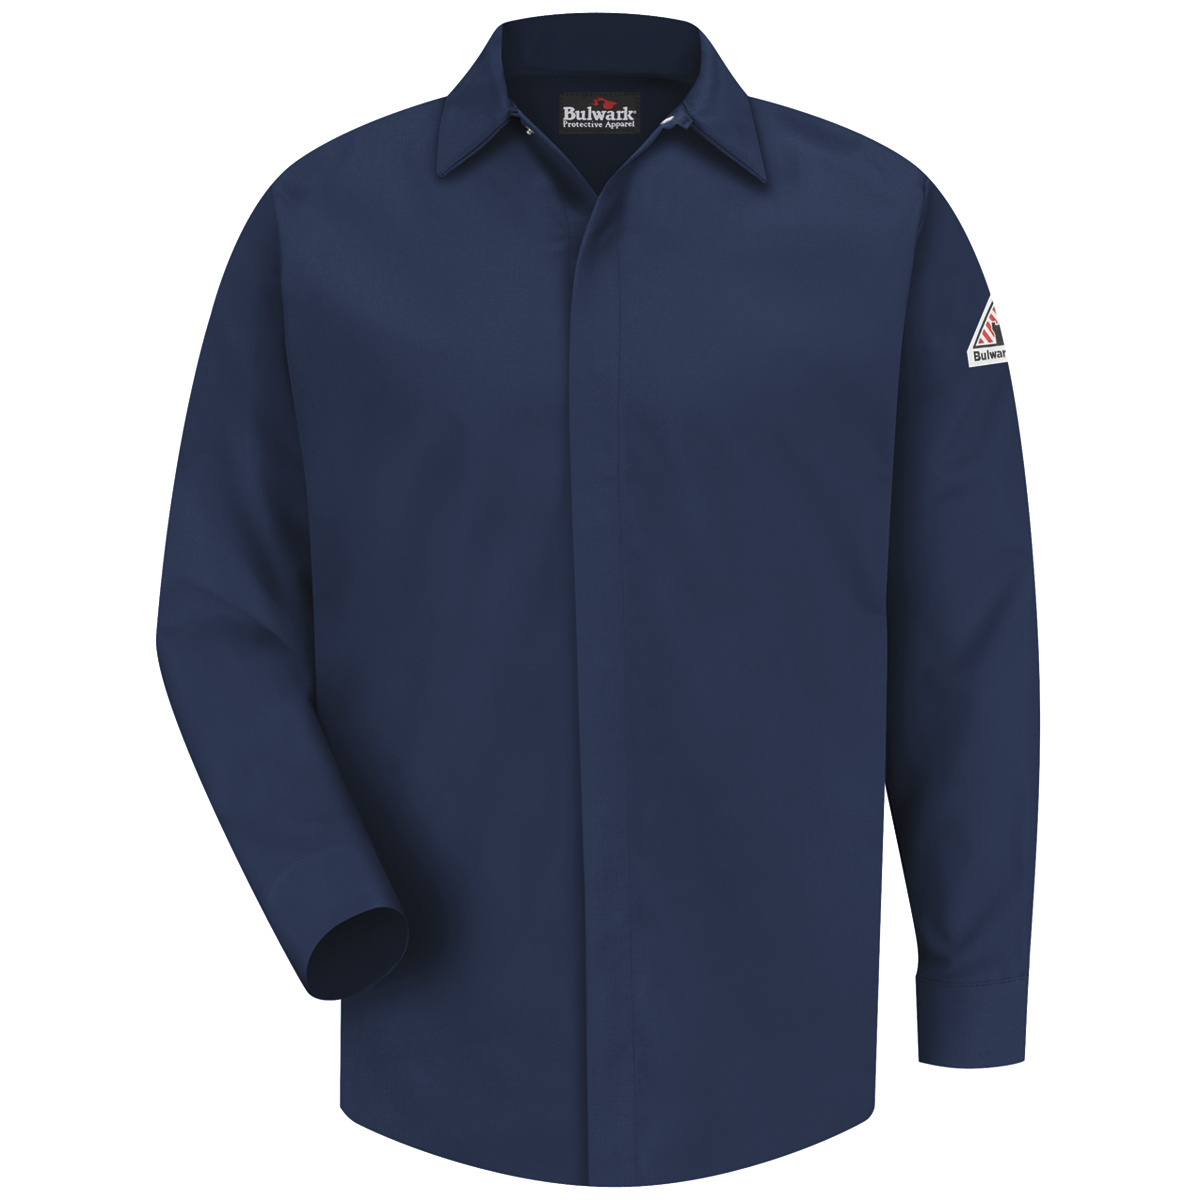 Bulwark® 2X Tall Navy Blue Westex Ultrasoft®/Cotton/Nylon Flame Resistant Work Shirt With Gripper Front Closure